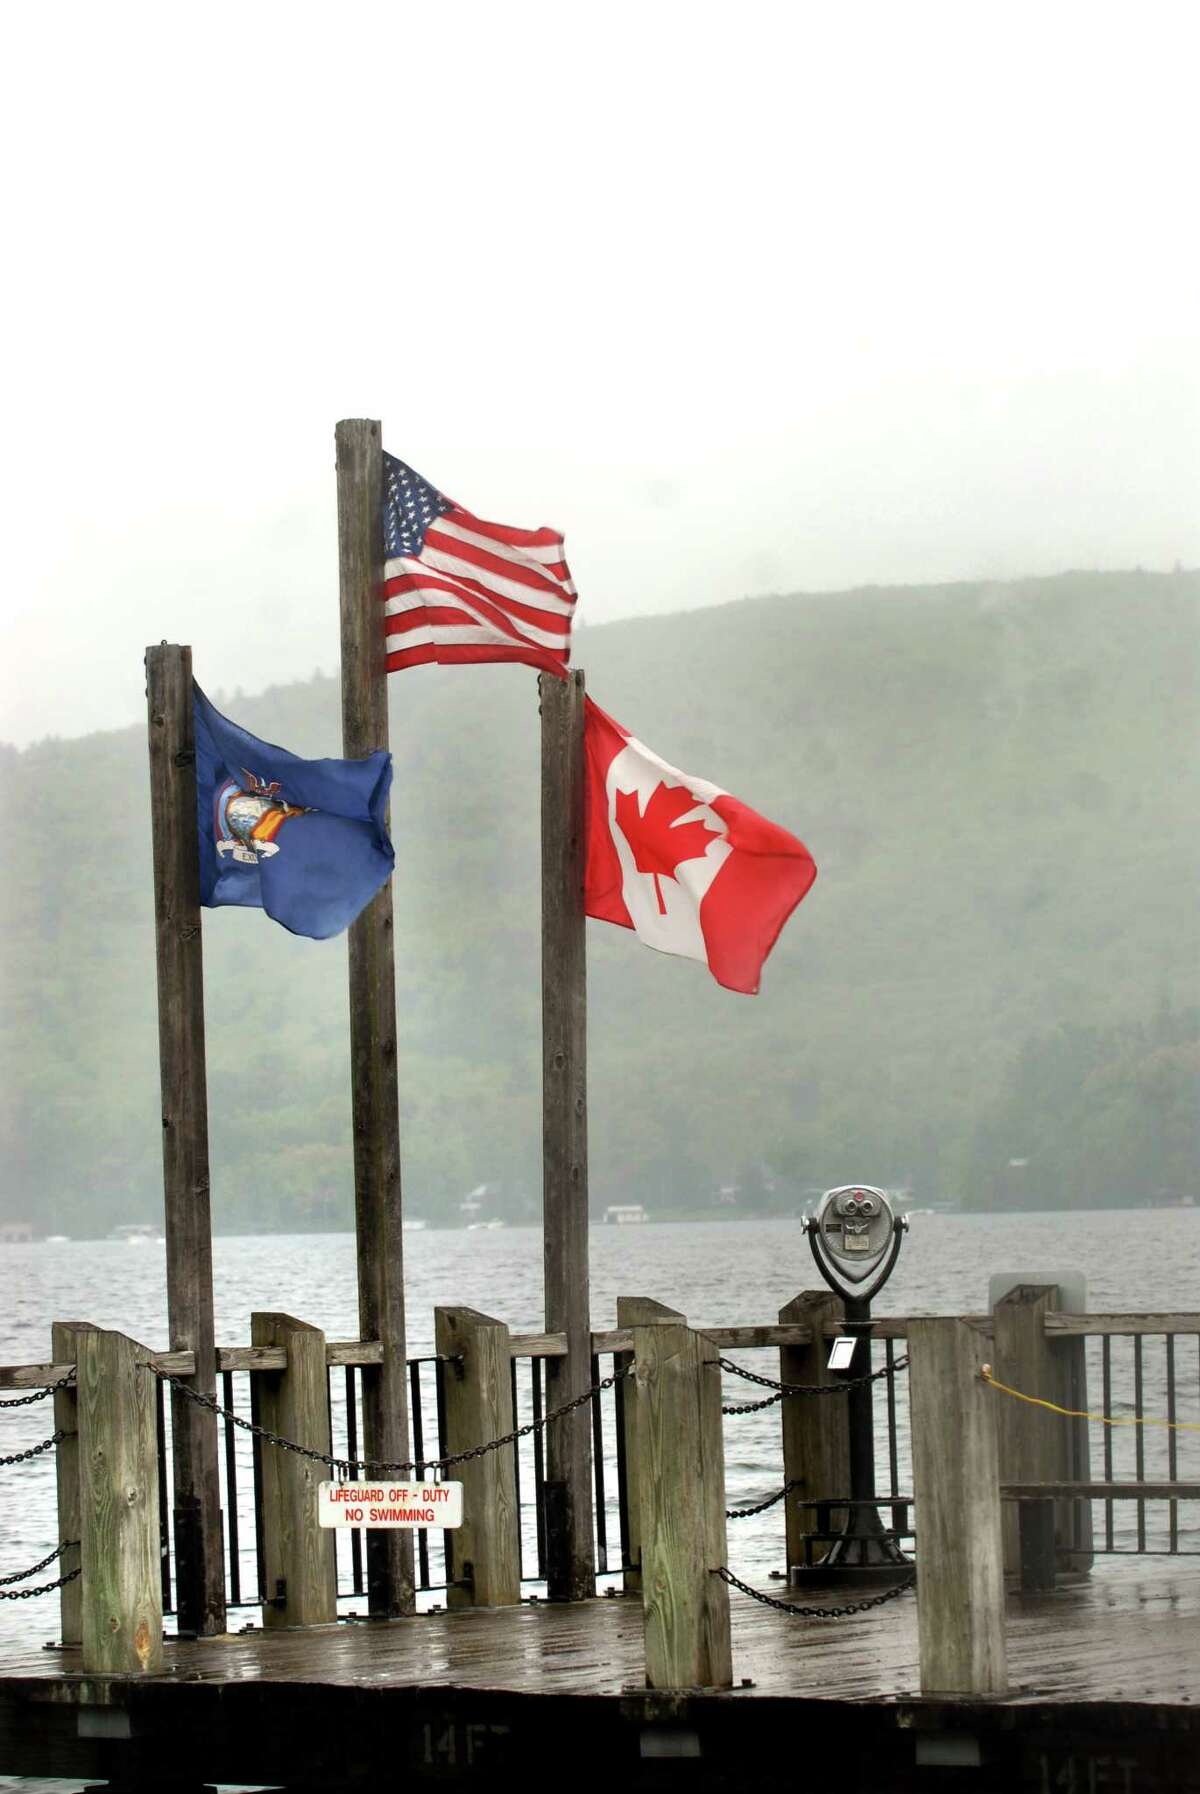 Despite sagging Canadian opinions about the United States and President Donald Trump, business and tourism ties between New York and Canada appeared not to have suffered this summer, according to officials. Here, the Canadian flag flies with the U.S. flag and the New York State flag on the public dock at the tourist destination of Lake George. (Times Union archive)